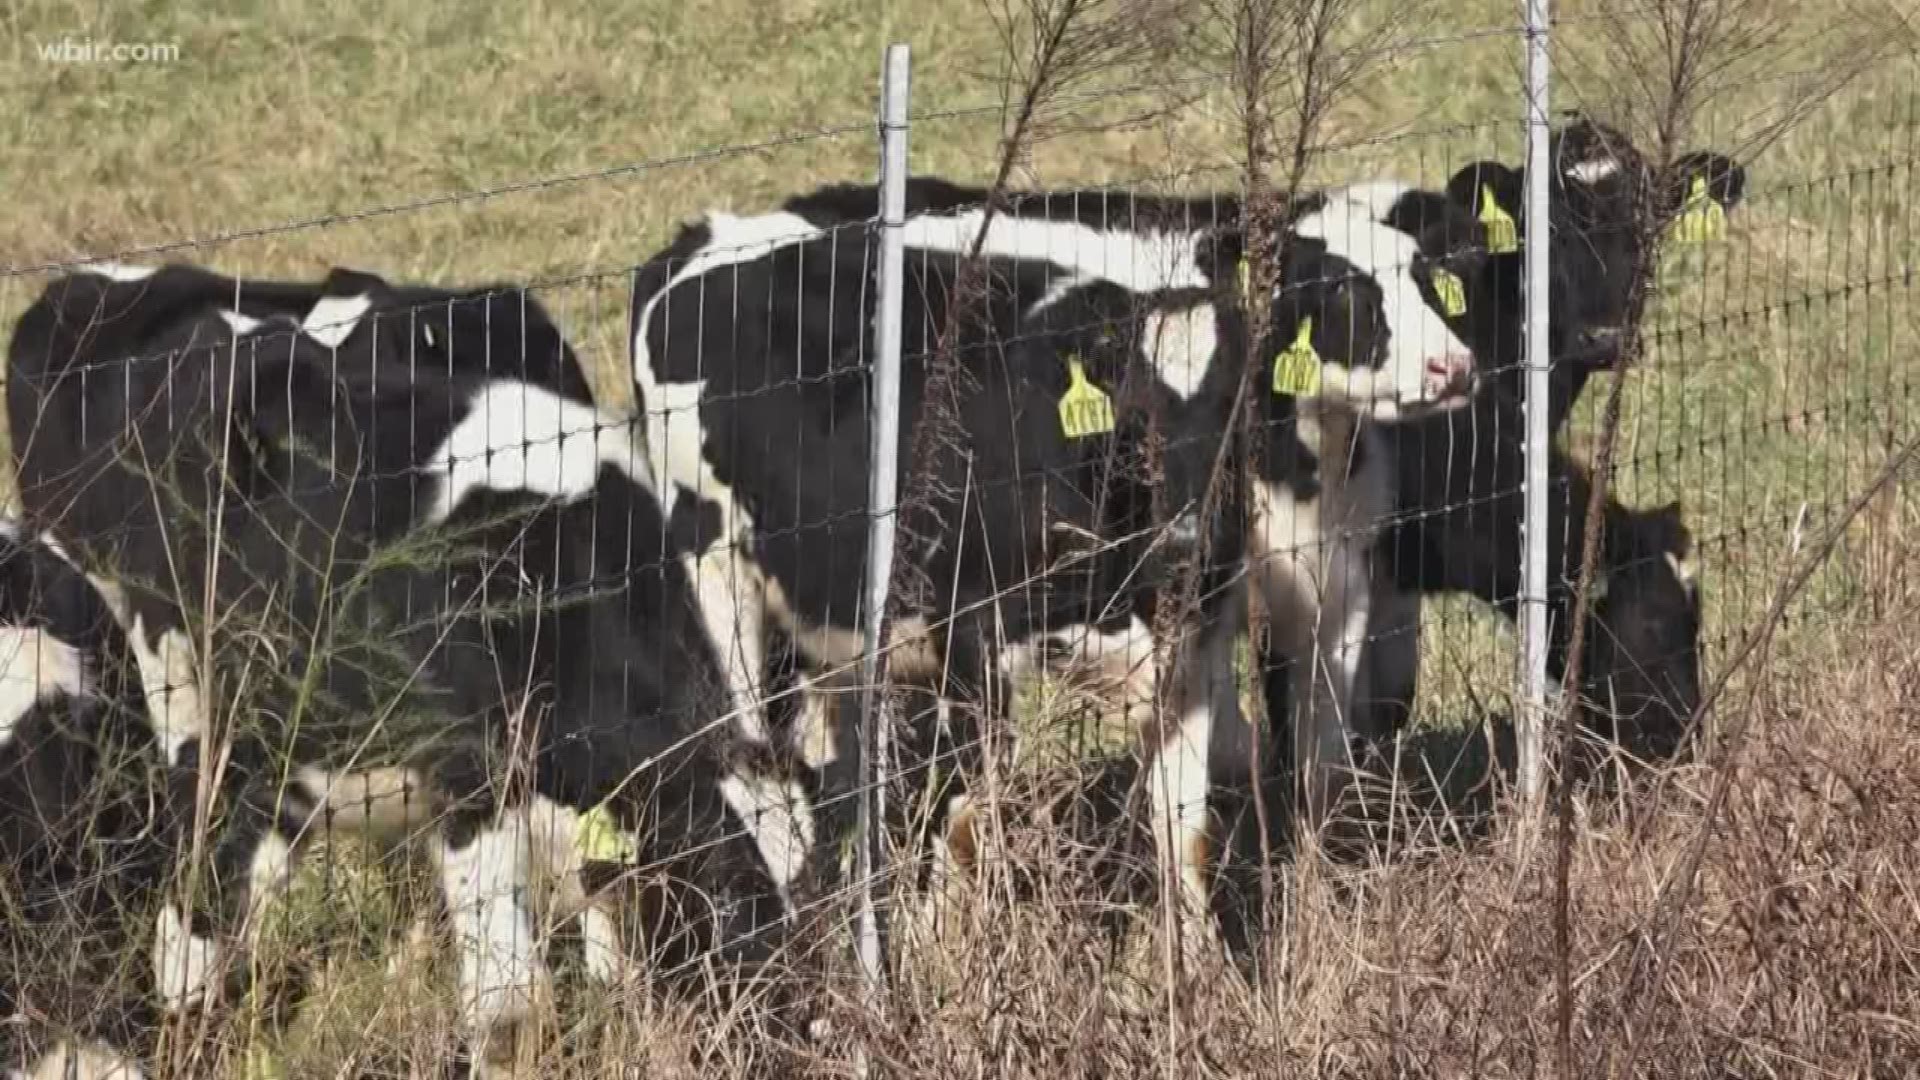 The National Farmers Union says since 1992, around 10 dairy farms a day have gone out of business. Now Dean Foods, owner of Mayfield, has filed bankruptcy.